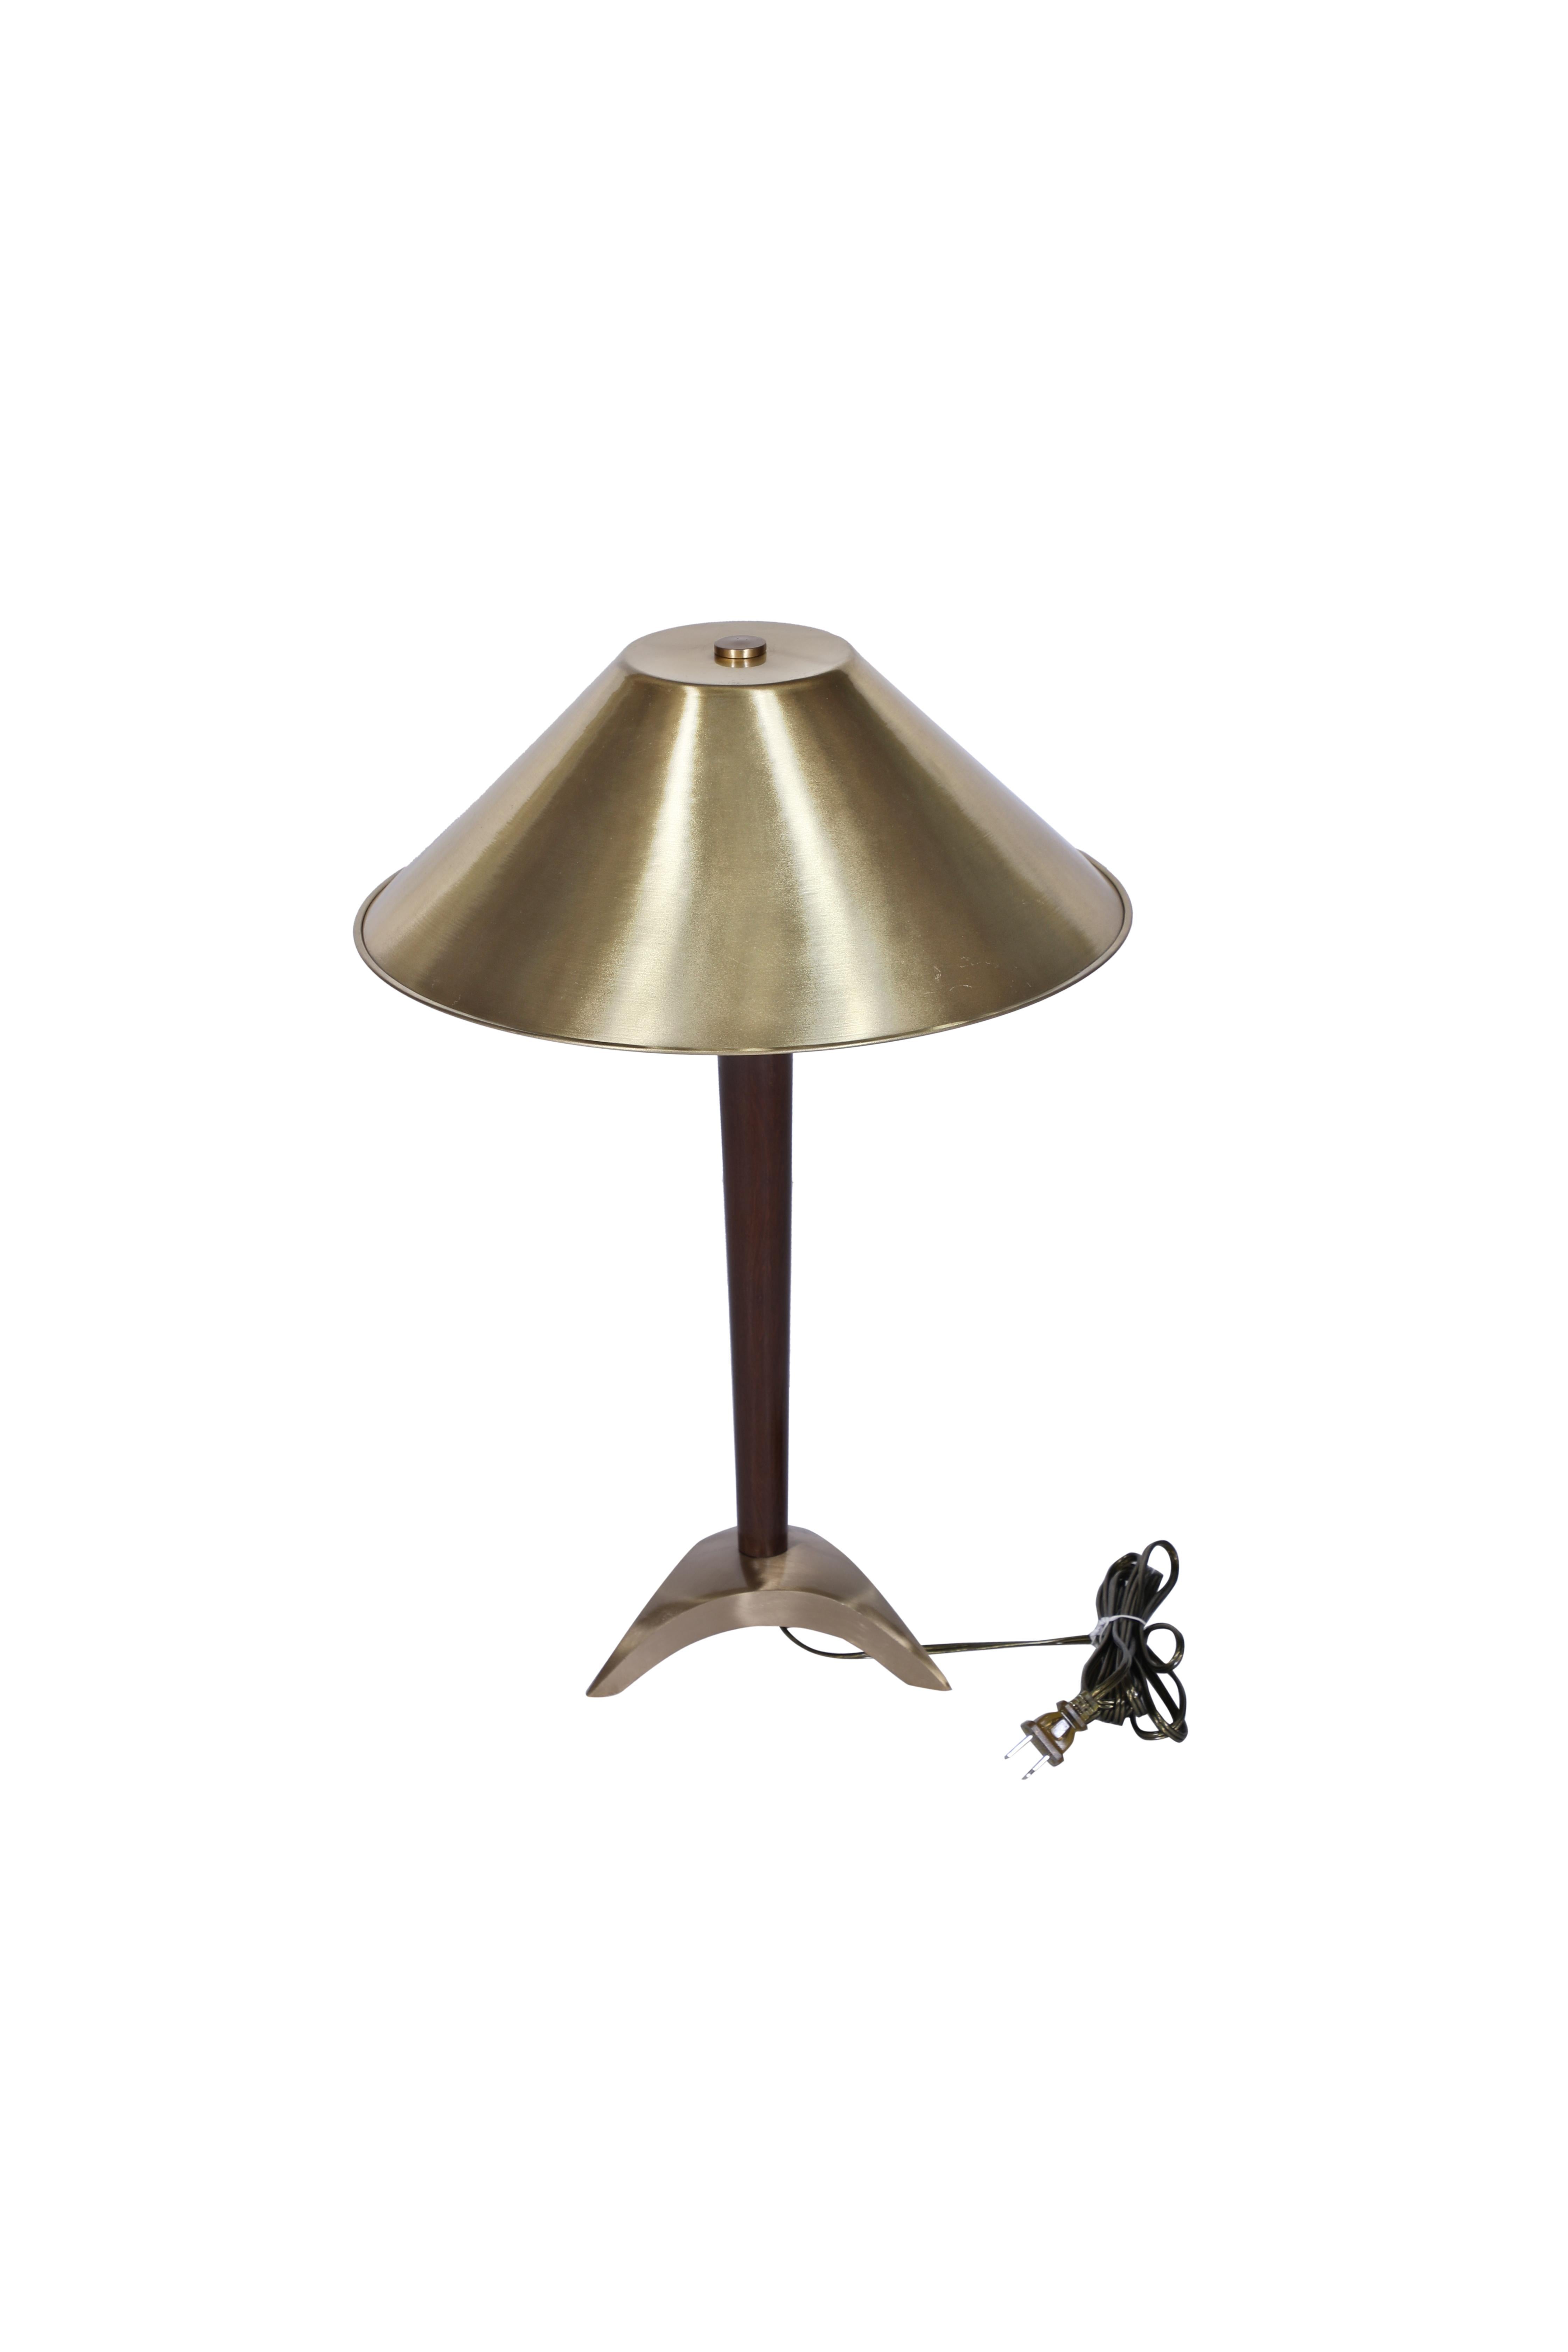 A pair of nautical brass and teak table lamps from the stateroom of a decommissioned ship.  Shade is also brass in a conical shape and has a a tripod base.  Circa 1970's.  Rewired for American use. Takes a standard base bulb.

The Lockhart